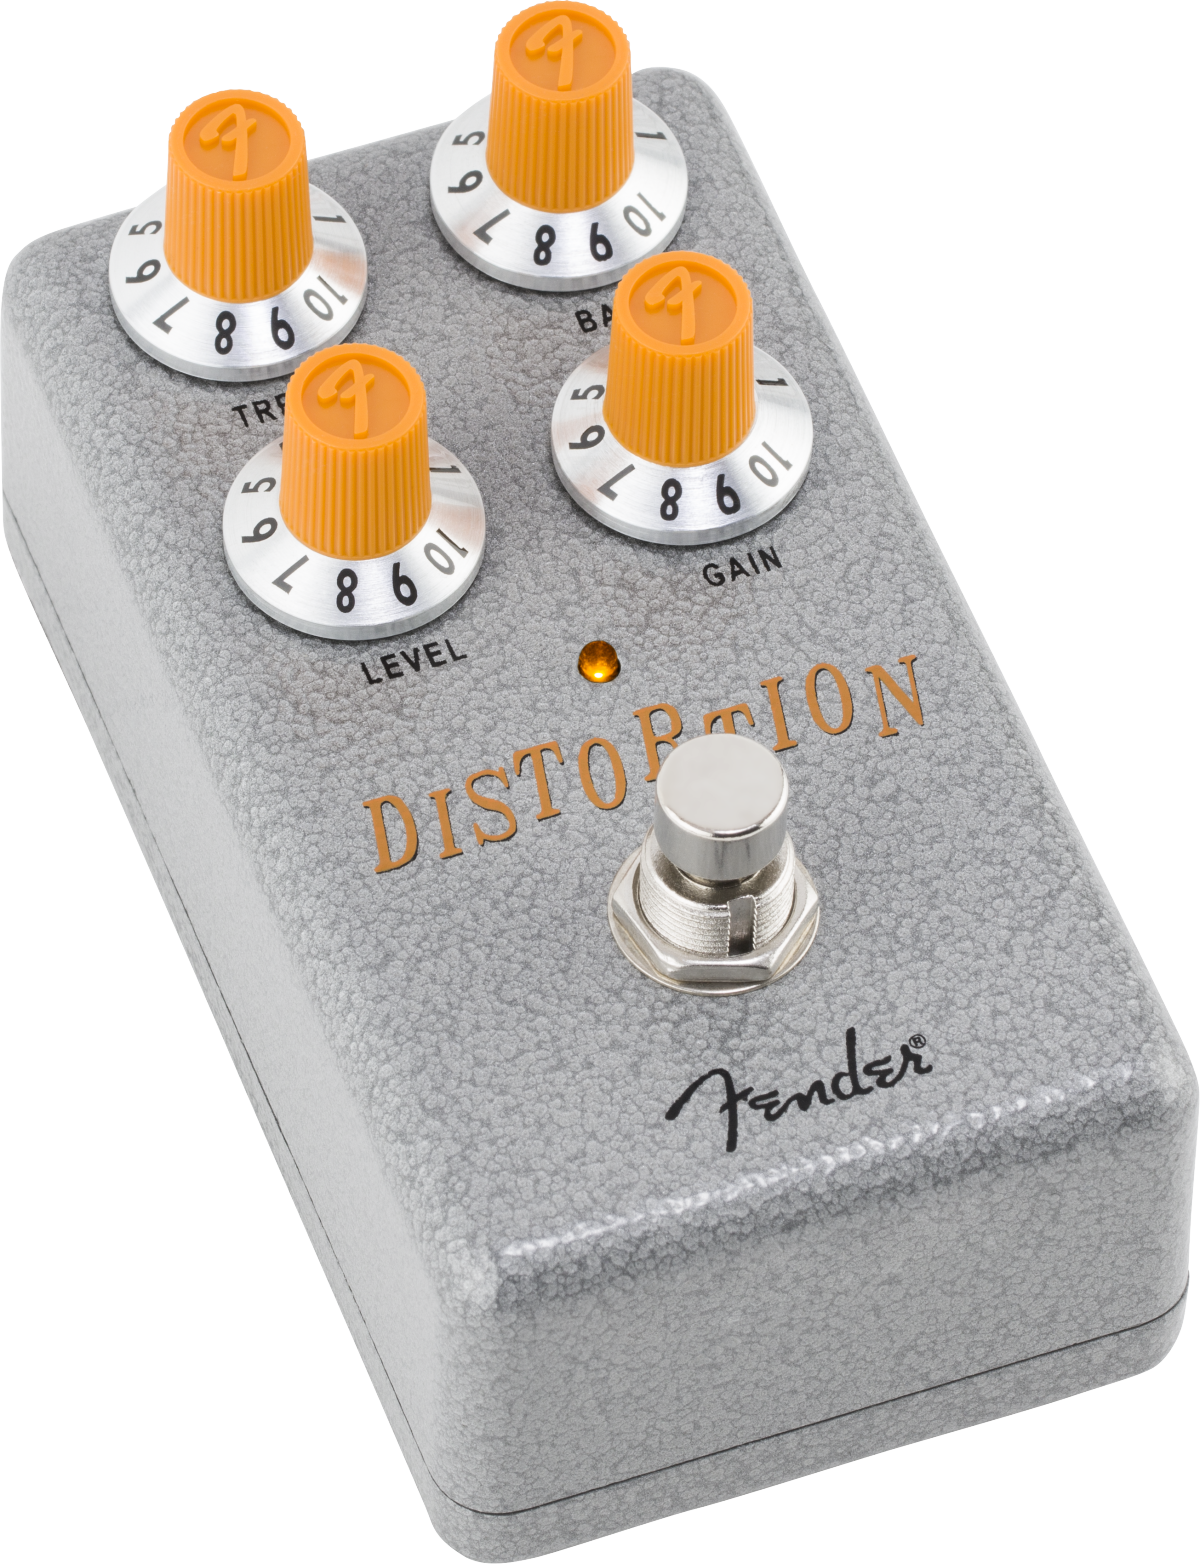 Fender Hammertone Distortion - Overdrive, distortion & fuzz effect pedal - Main picture